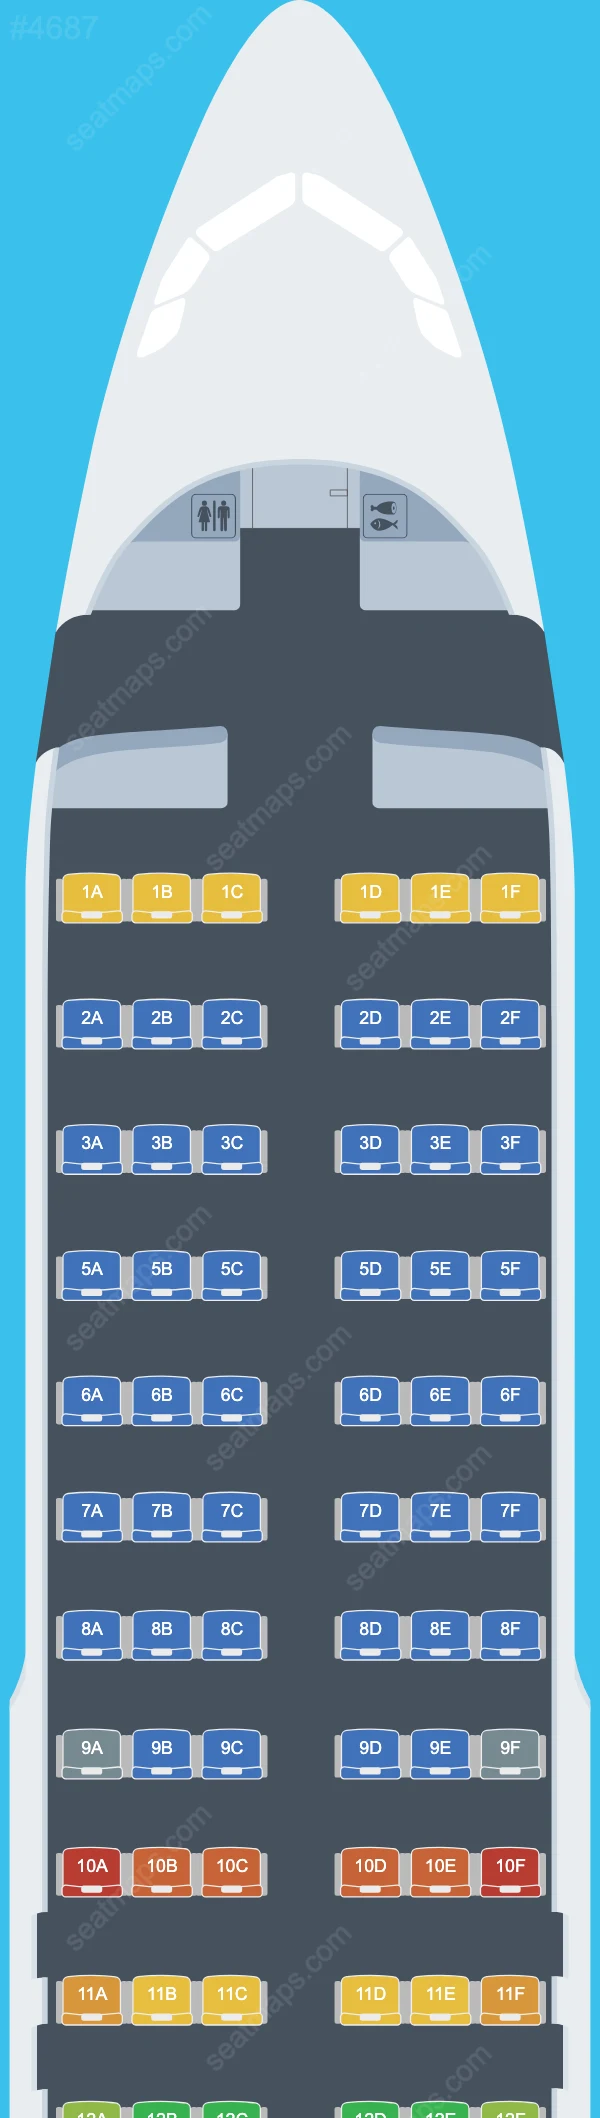 StarFlyer Airbus A320 Seat Maps A320-200 V.1